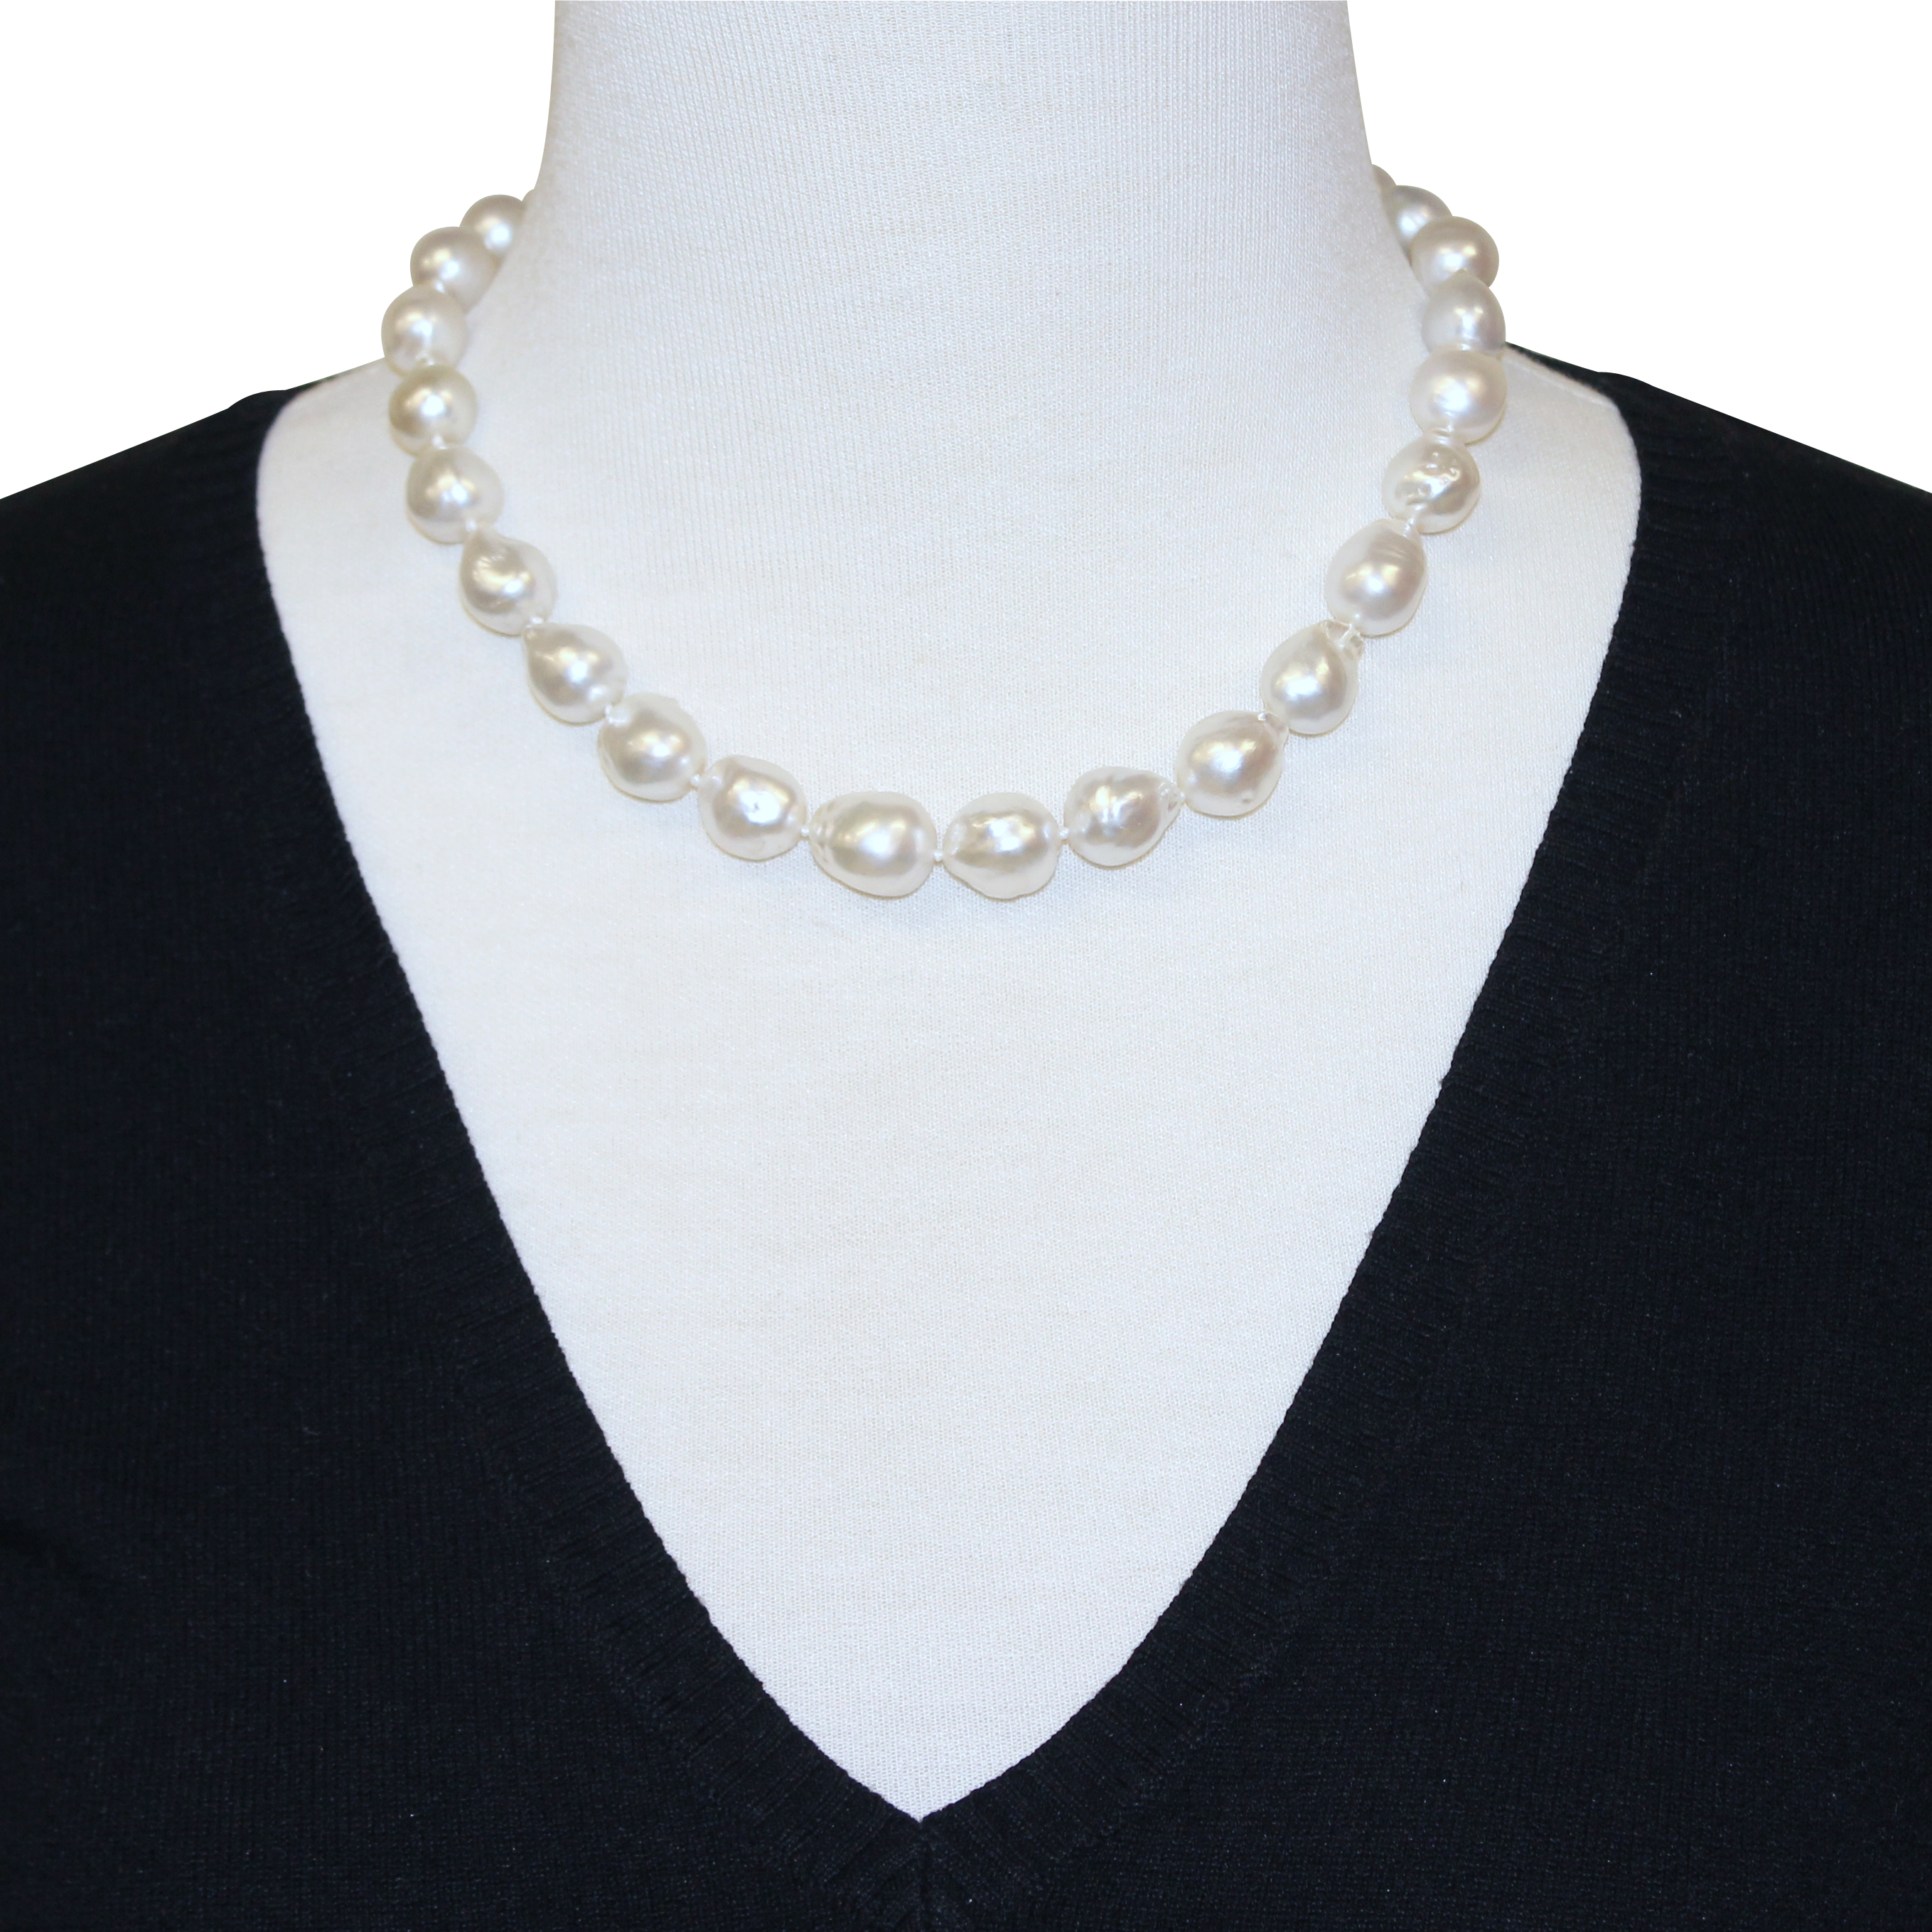 10-13 MM Natural Shape White South Sea Pearl Strand Necklace with 14k  Yellow Gold Clasp - 18 in - CBG001200